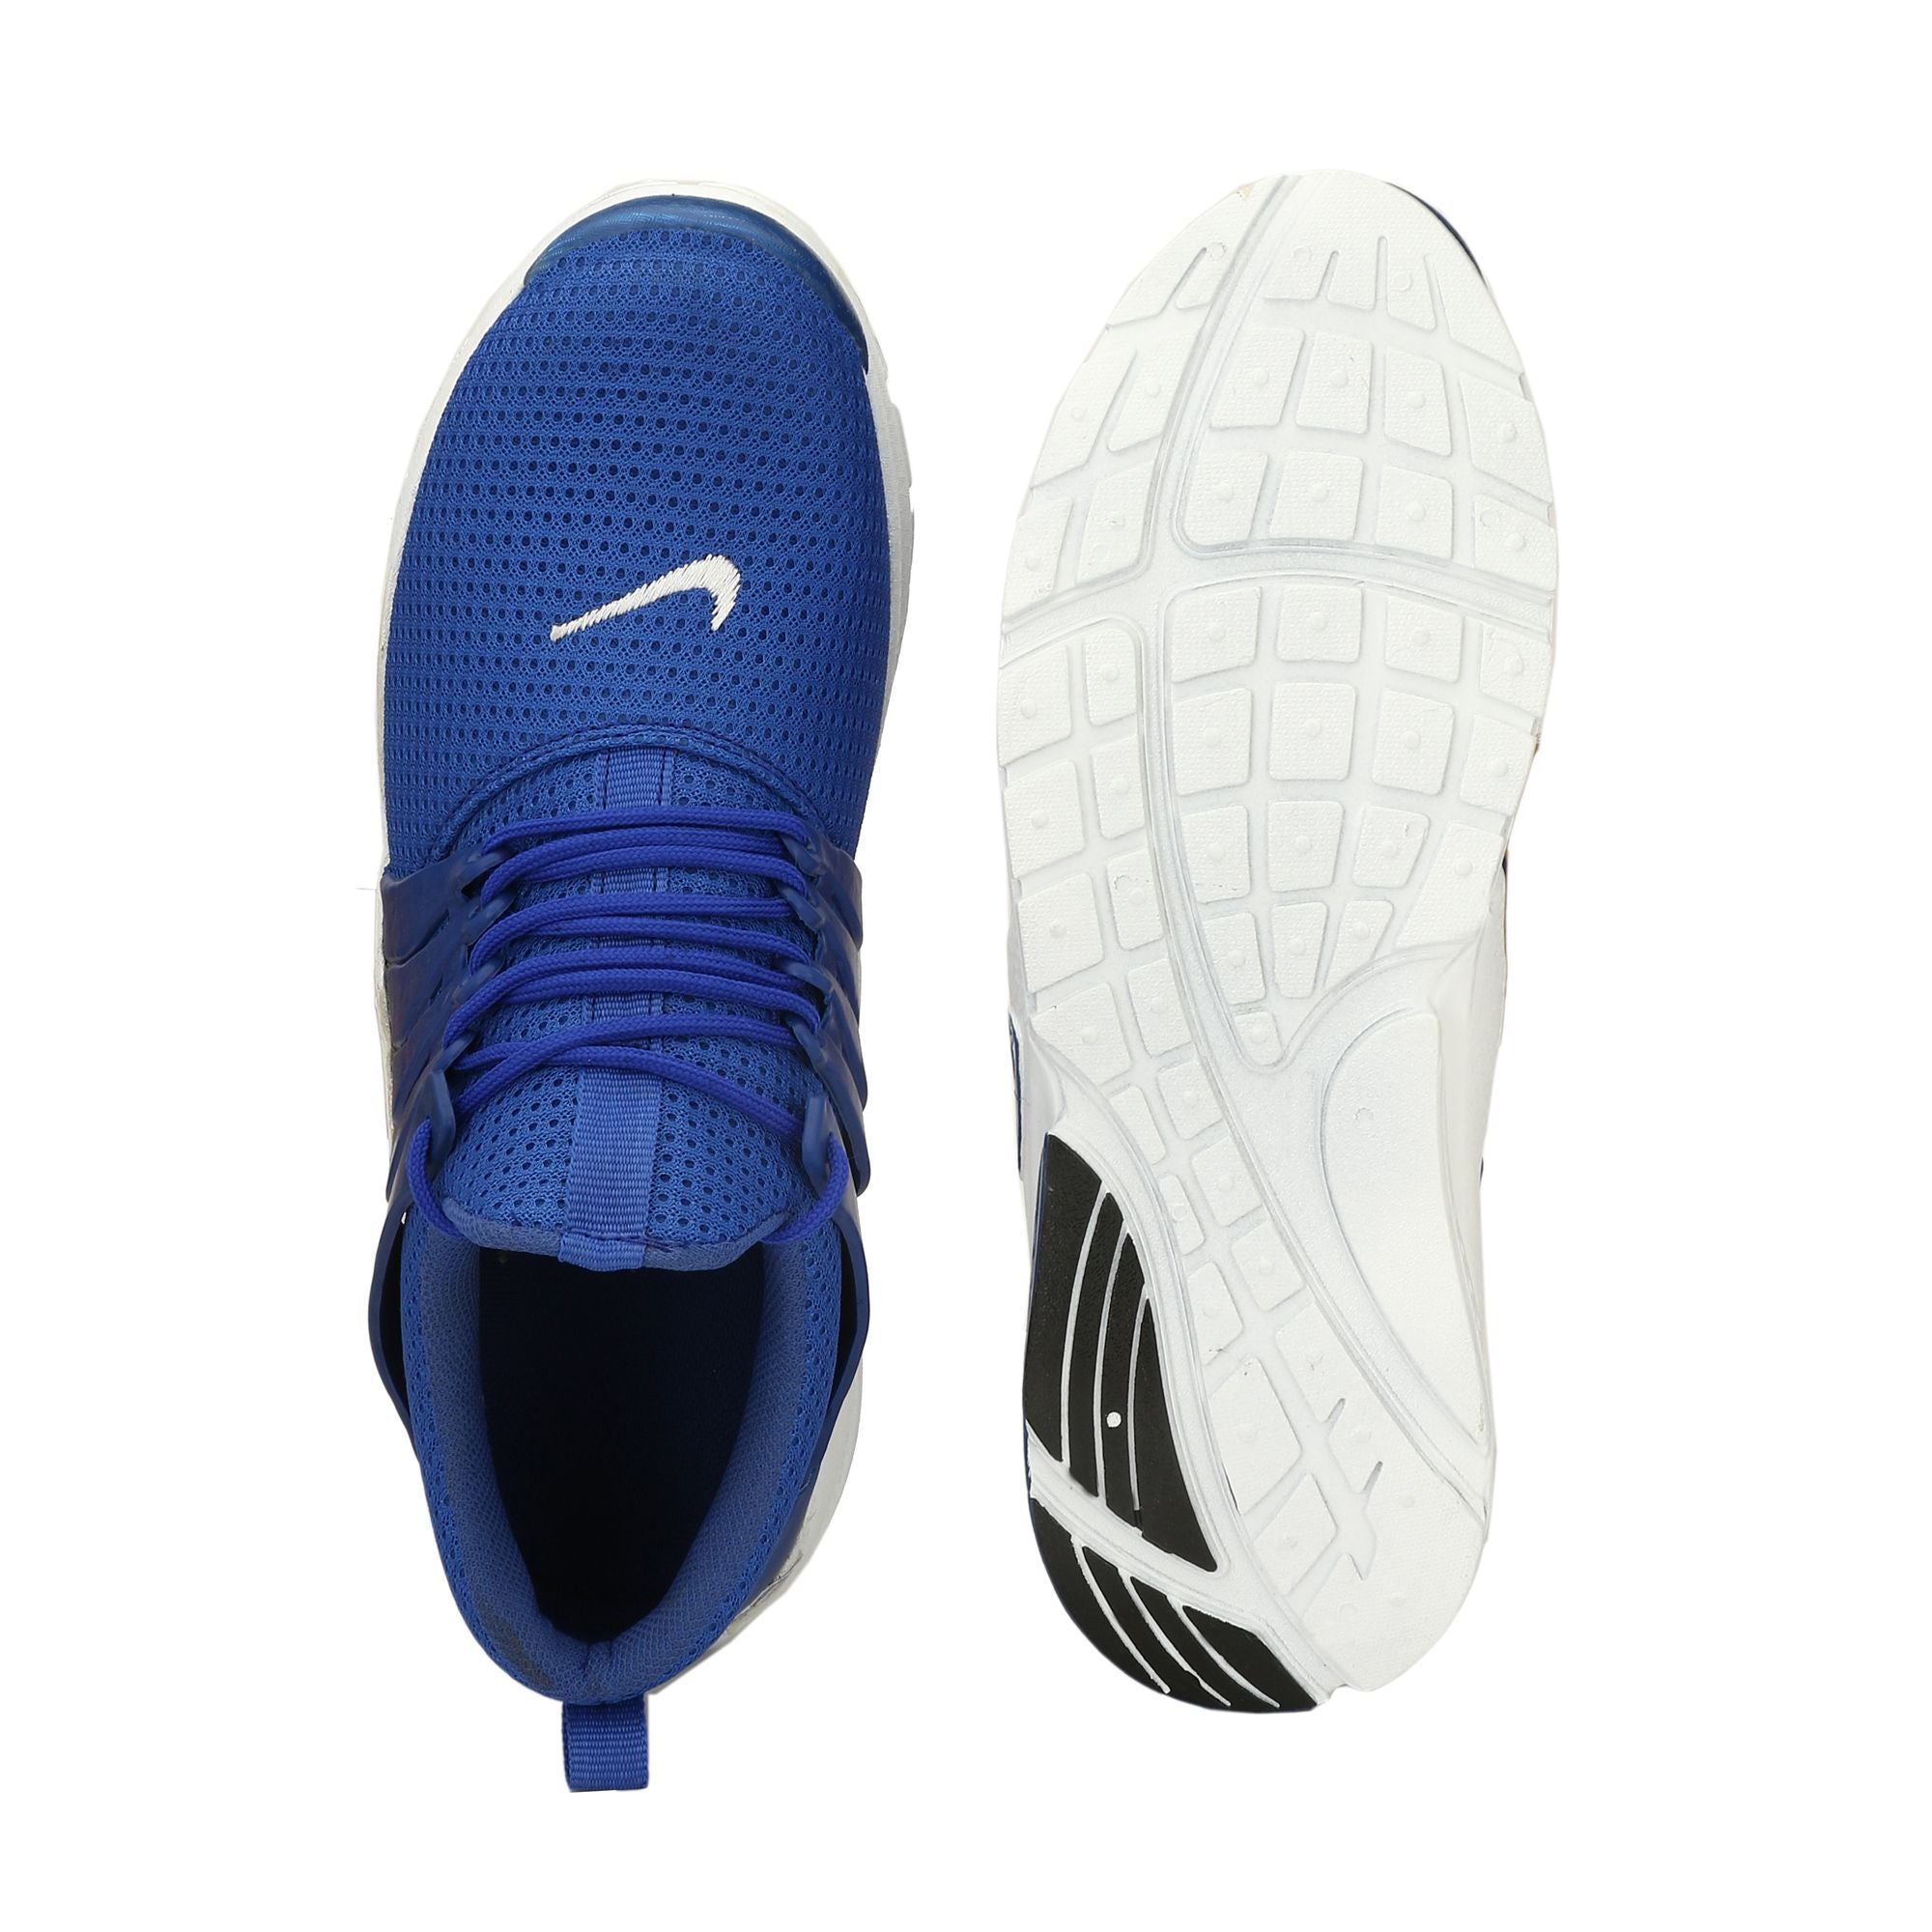 Purchase \u003e voonik nike shoes, Up to 63% OFF